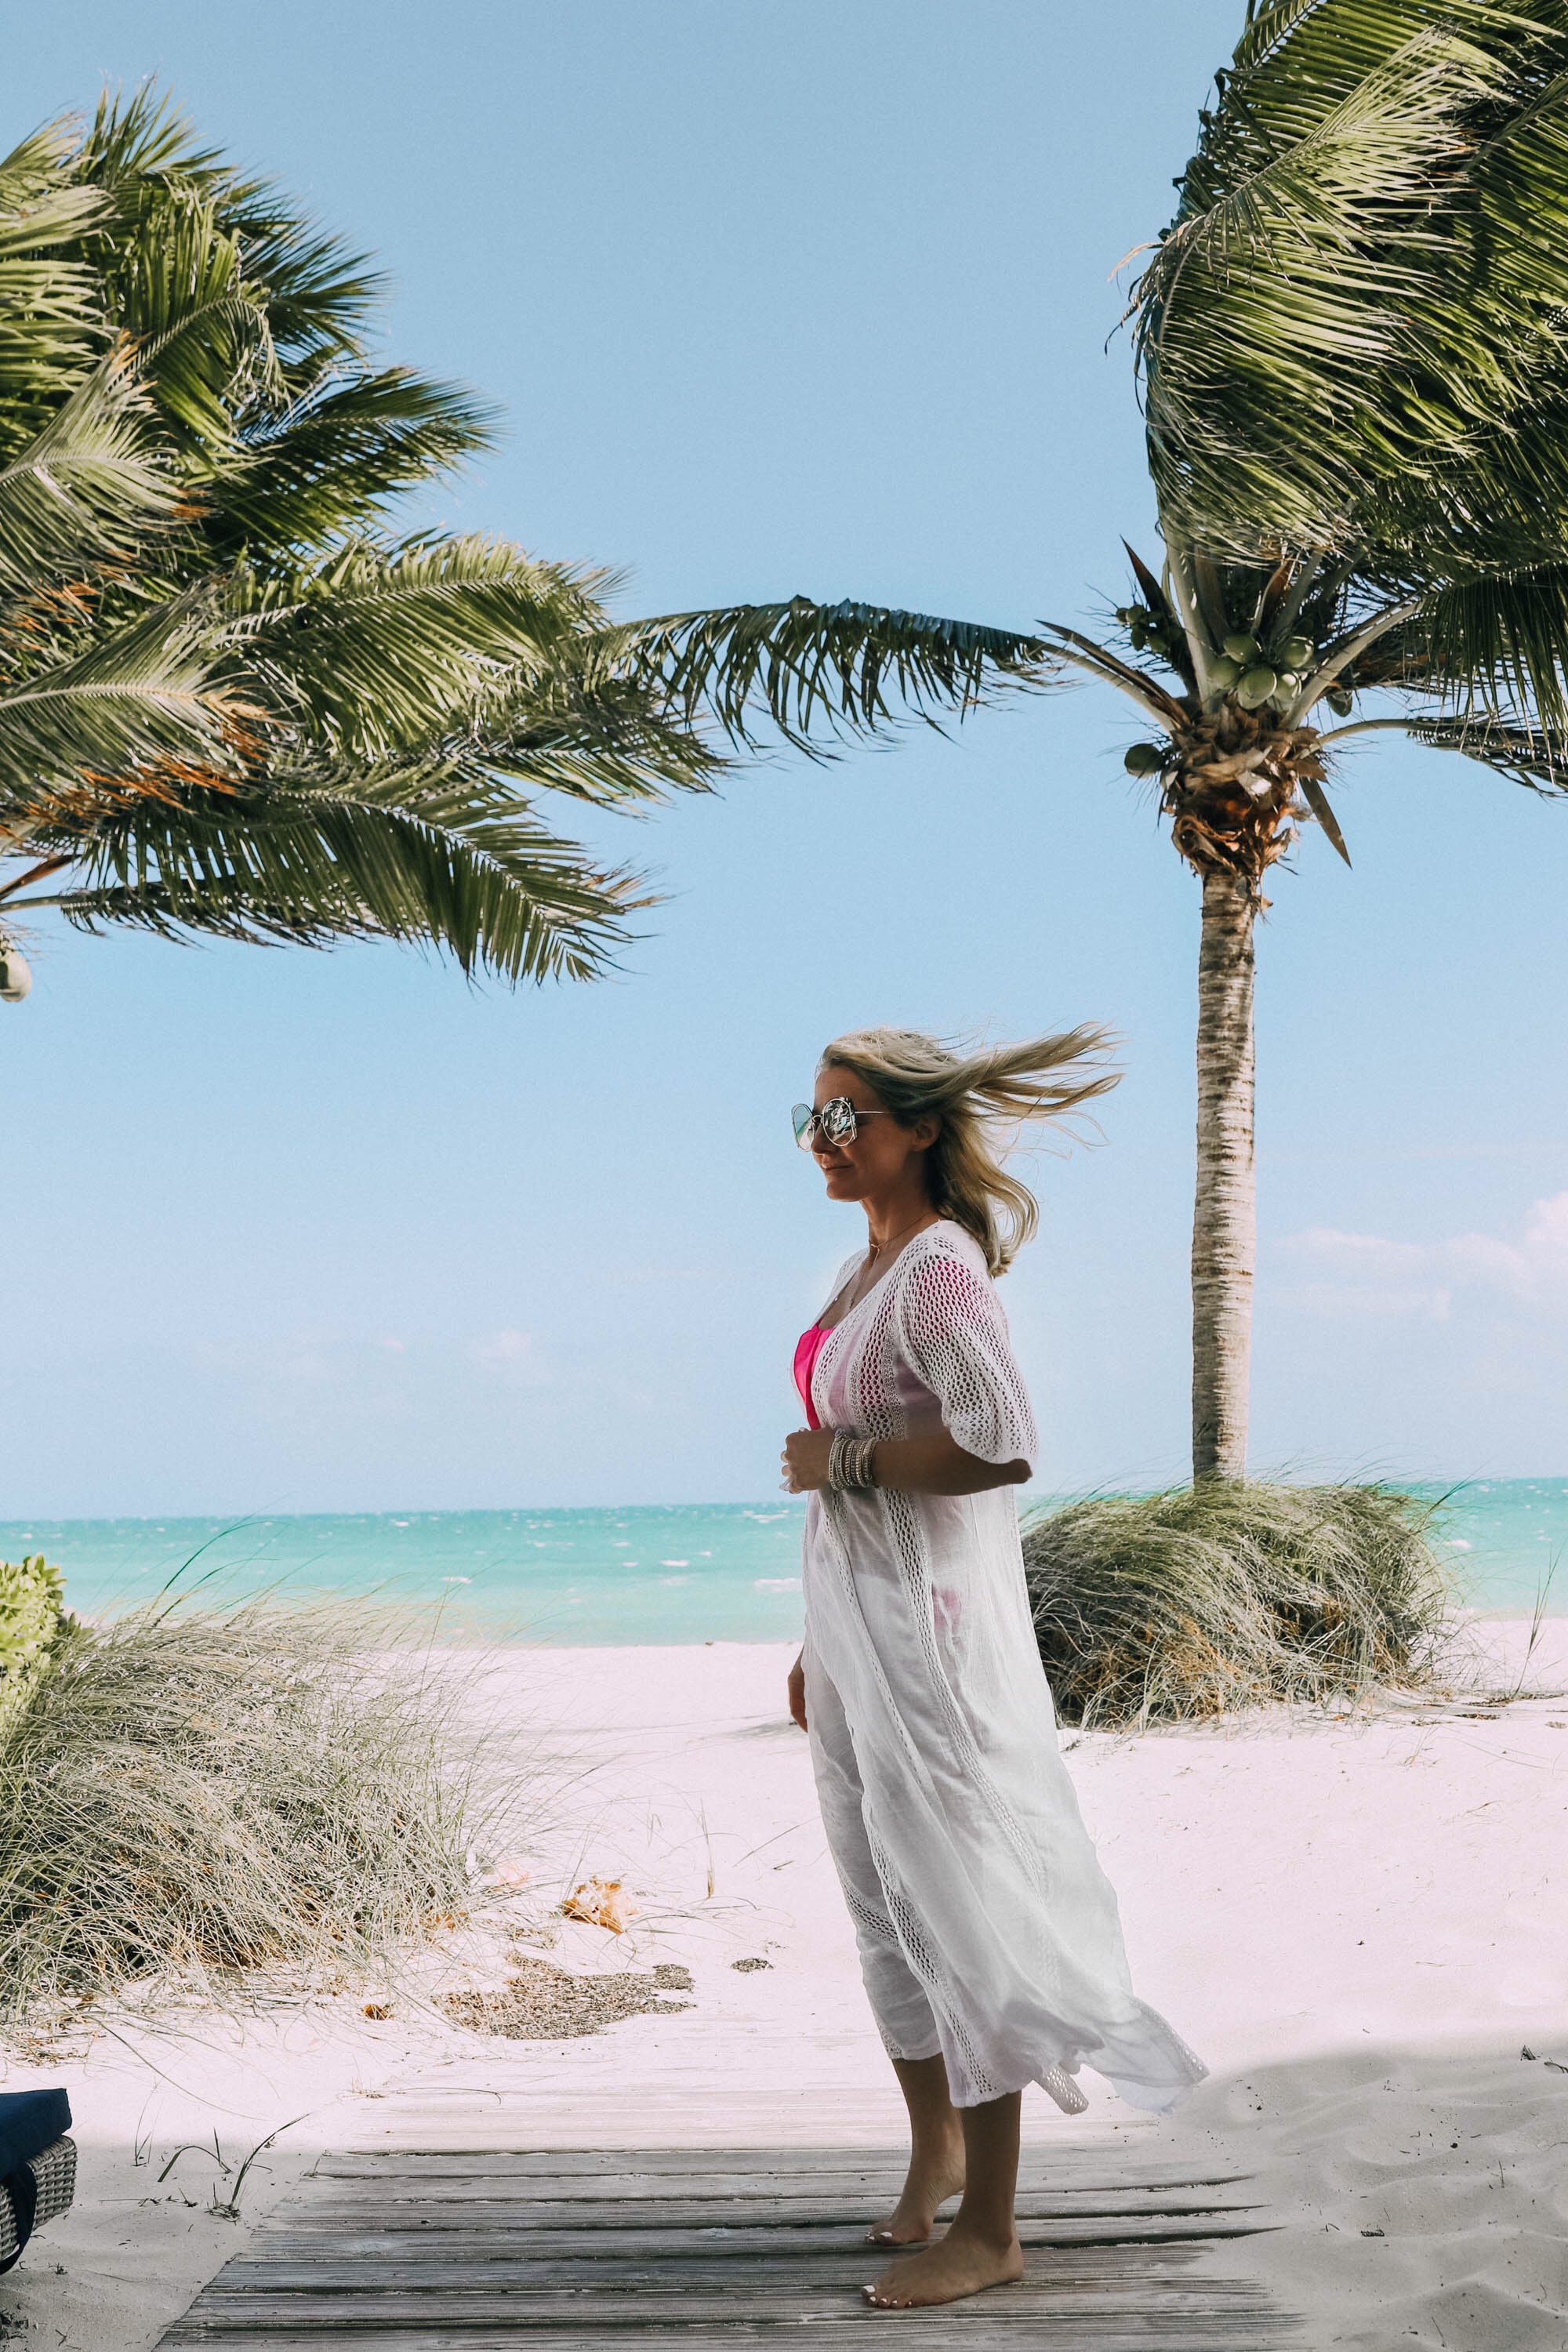 Best Coverups, Fashion blogger Erin Busbee of BusbeeStyle.com wearing a white crochet coverup by Elan over a pink swimsuit in the Bahamas